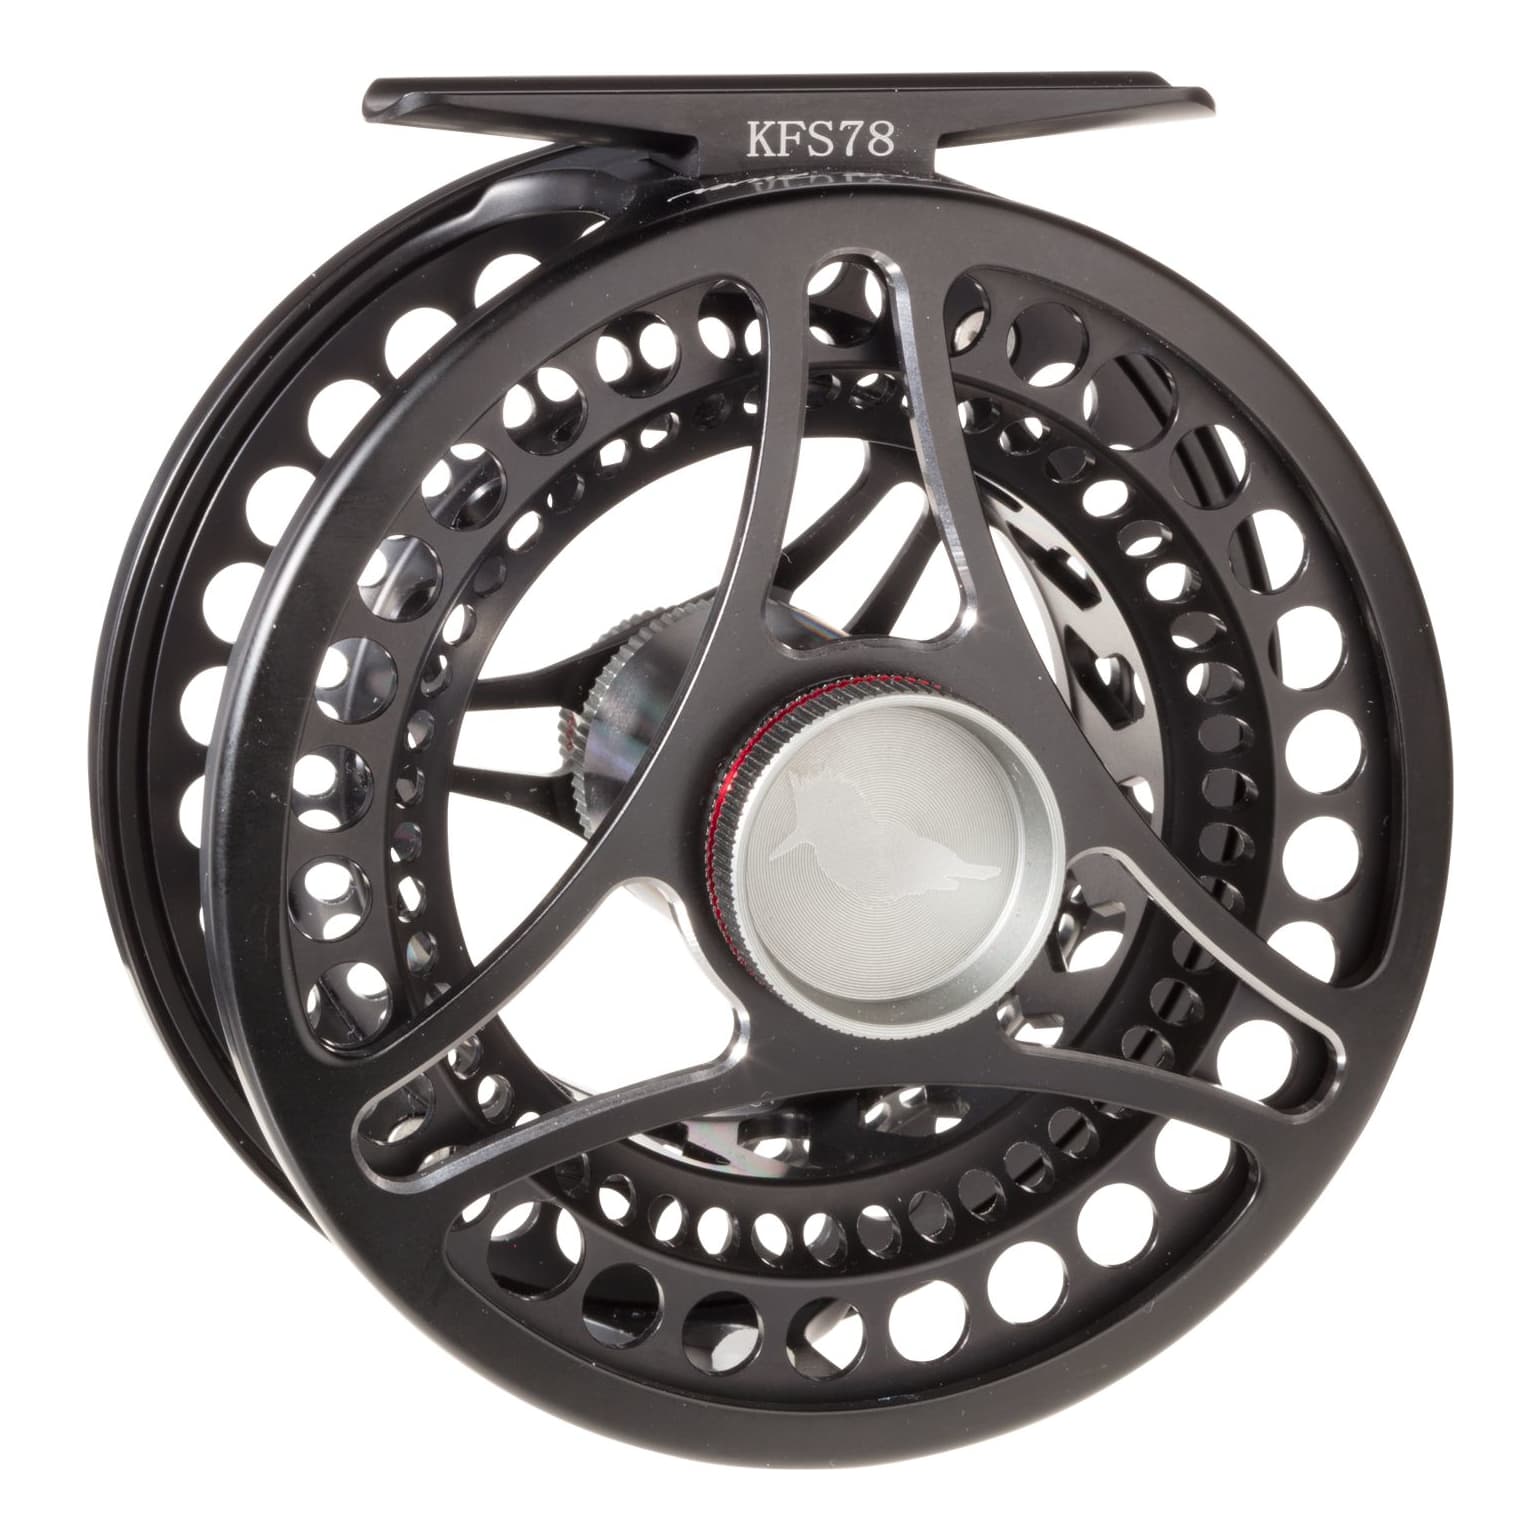 White River Fly Shop Kingfisher Fly Reel - Cabelas - White RIVER 